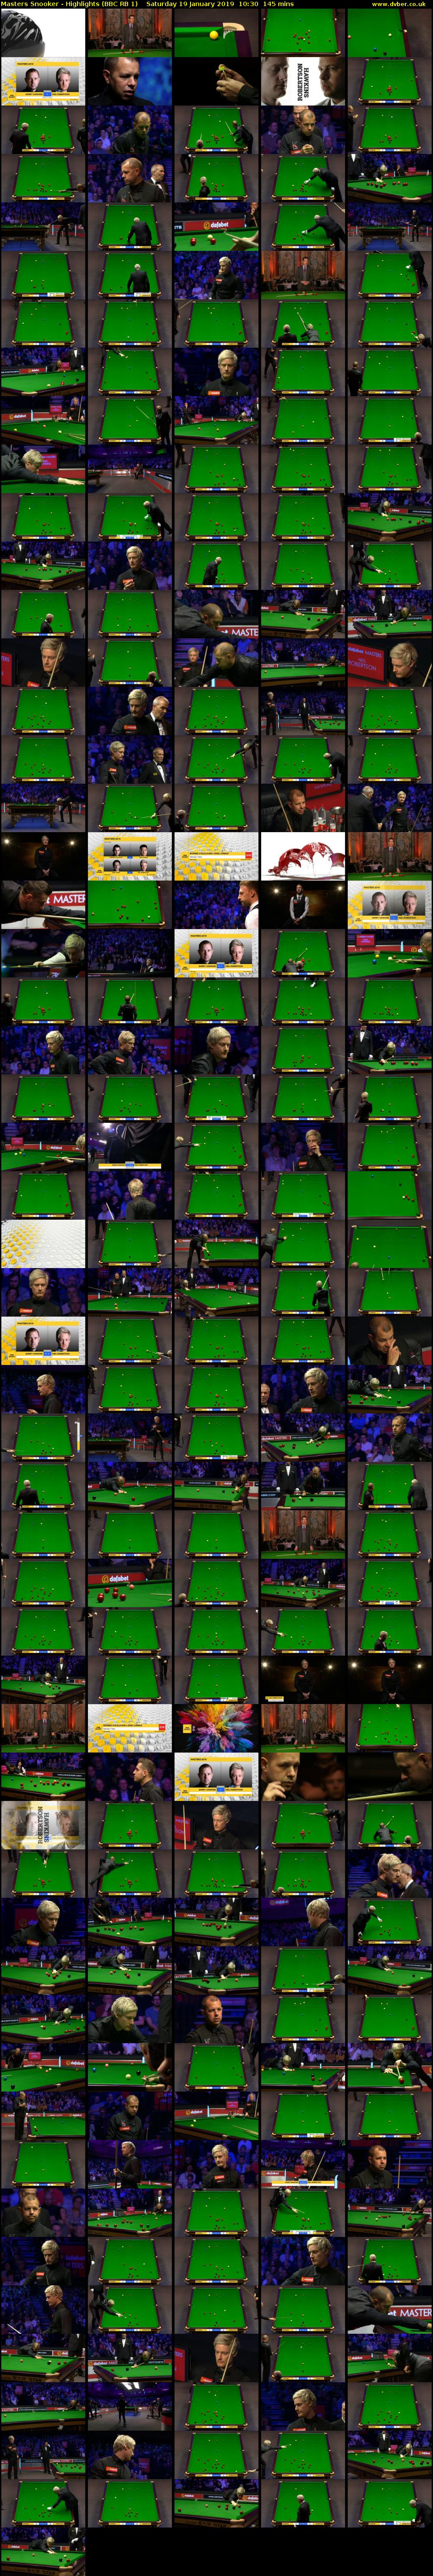 Masters Snooker - Highlights (BBC RB 1) Saturday 19 January 2019 10:30 - 12:55